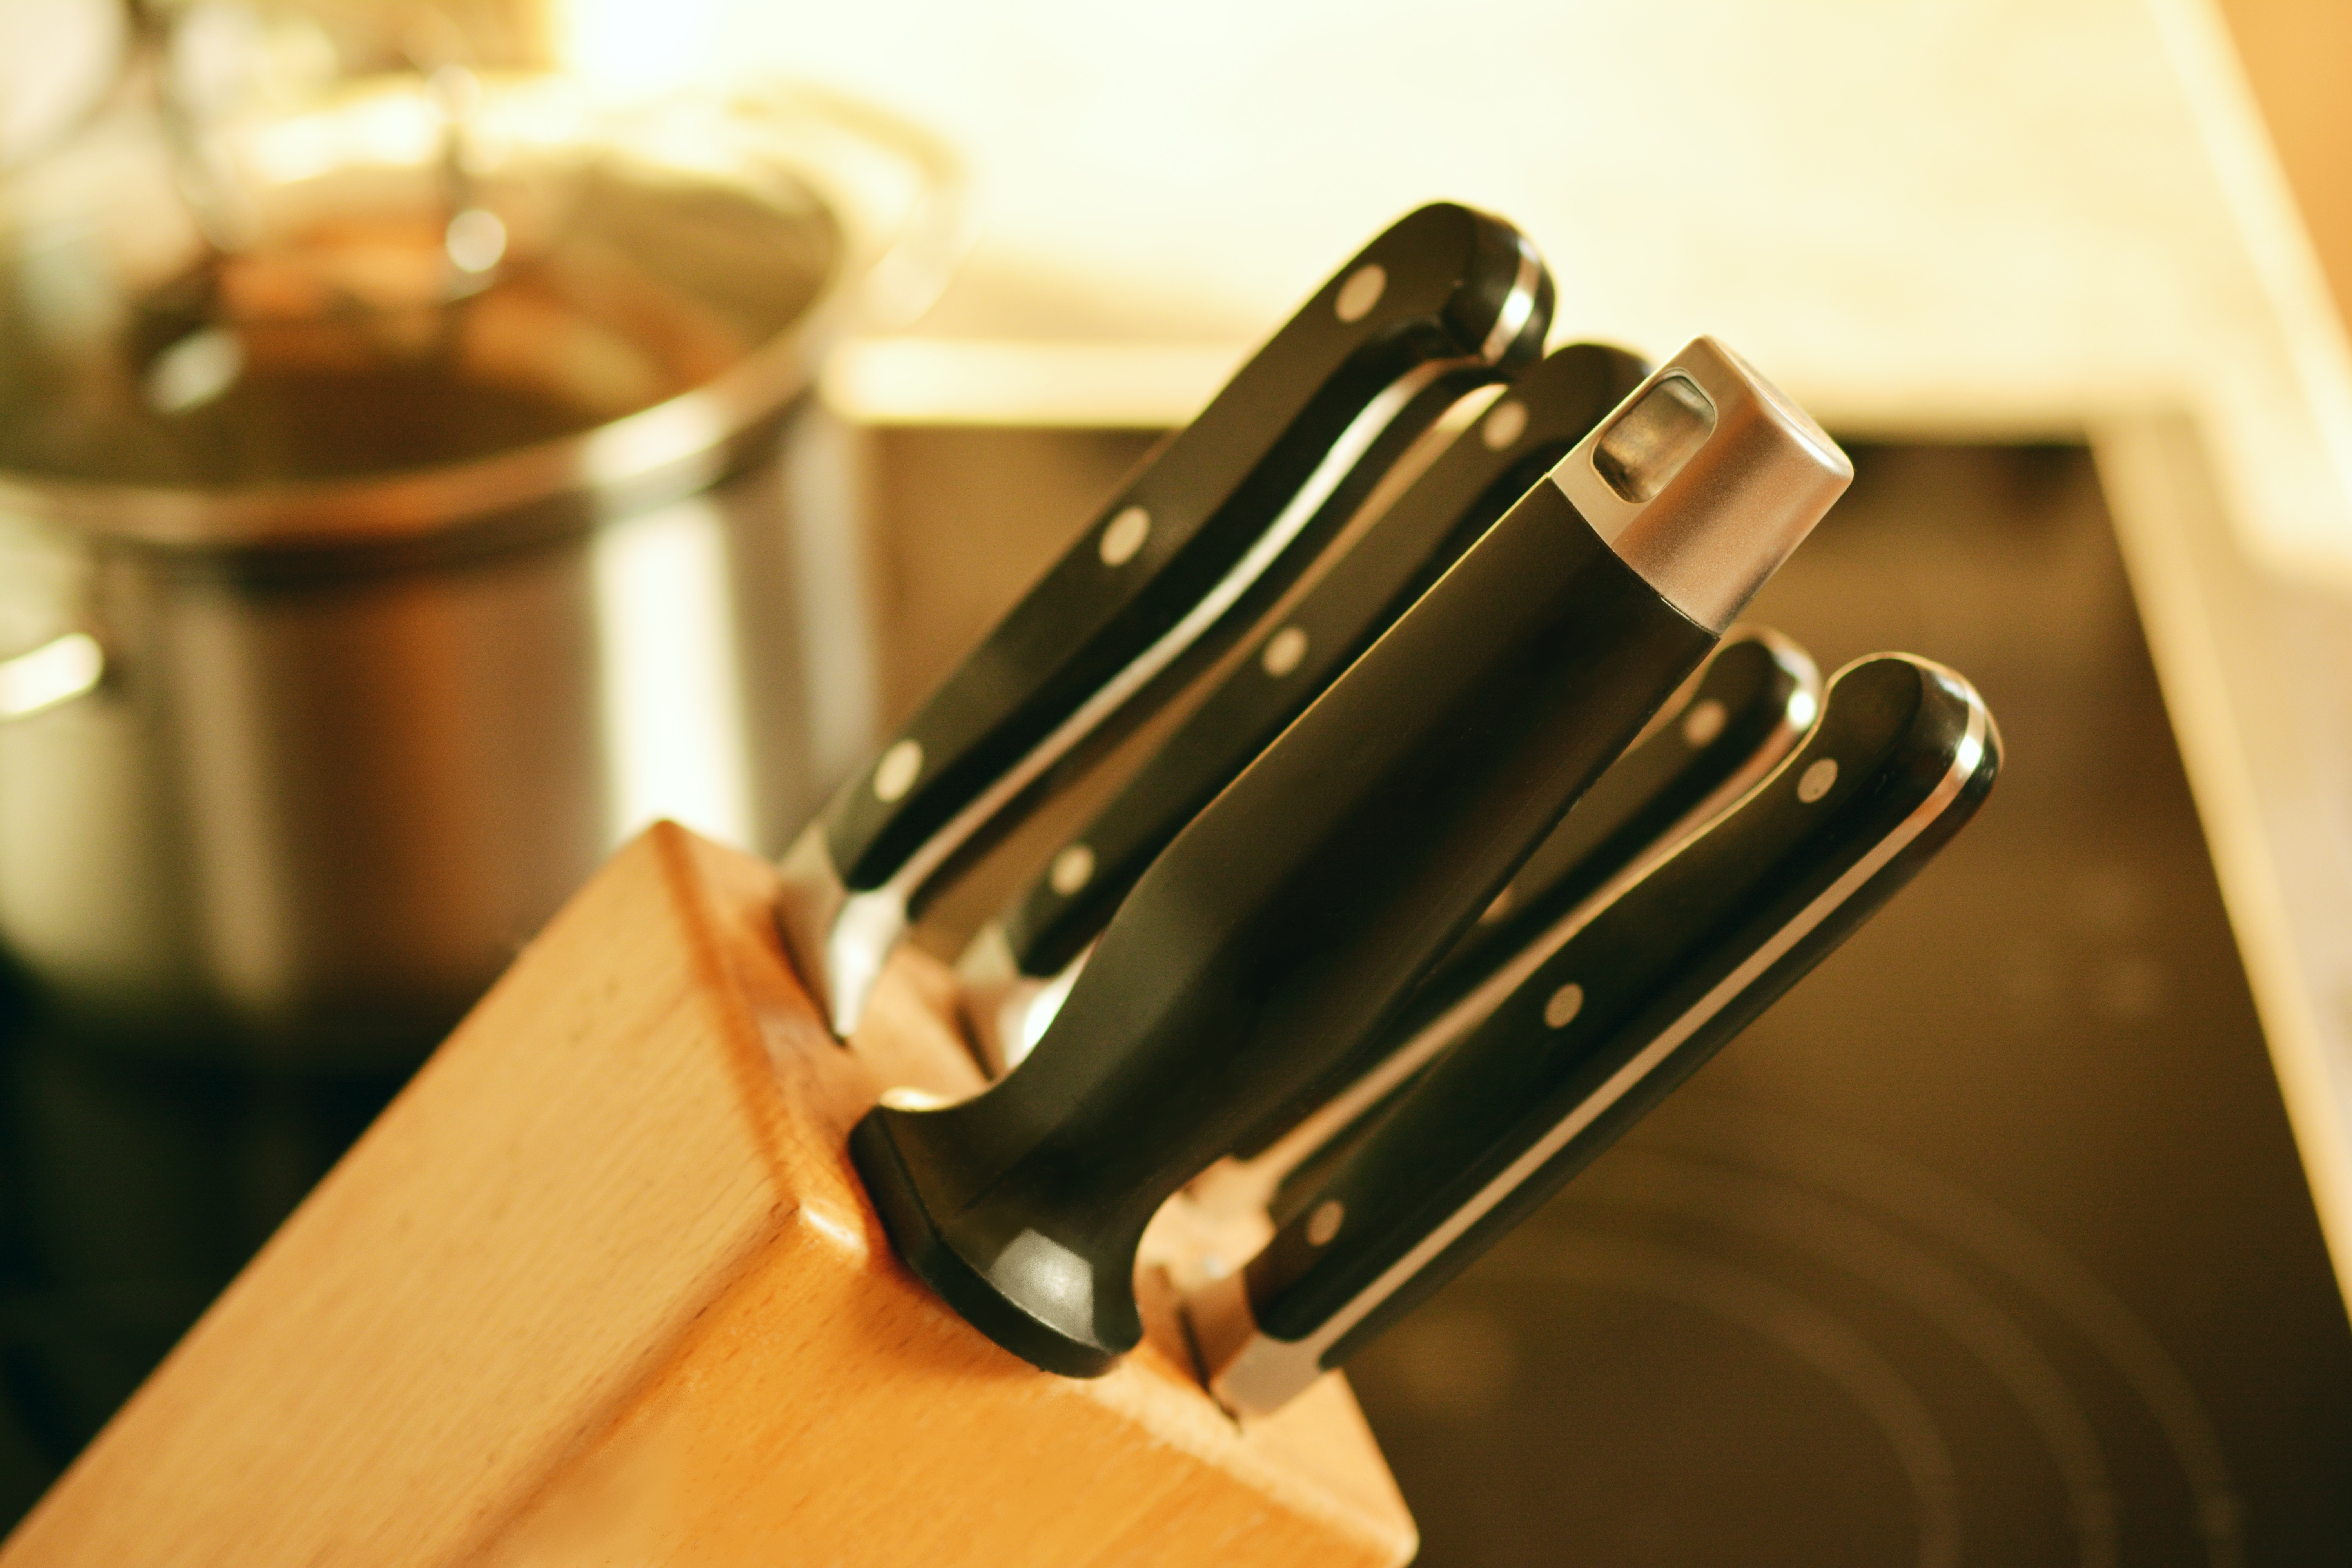 Image of knives in a butcher block, with stovetop nearby